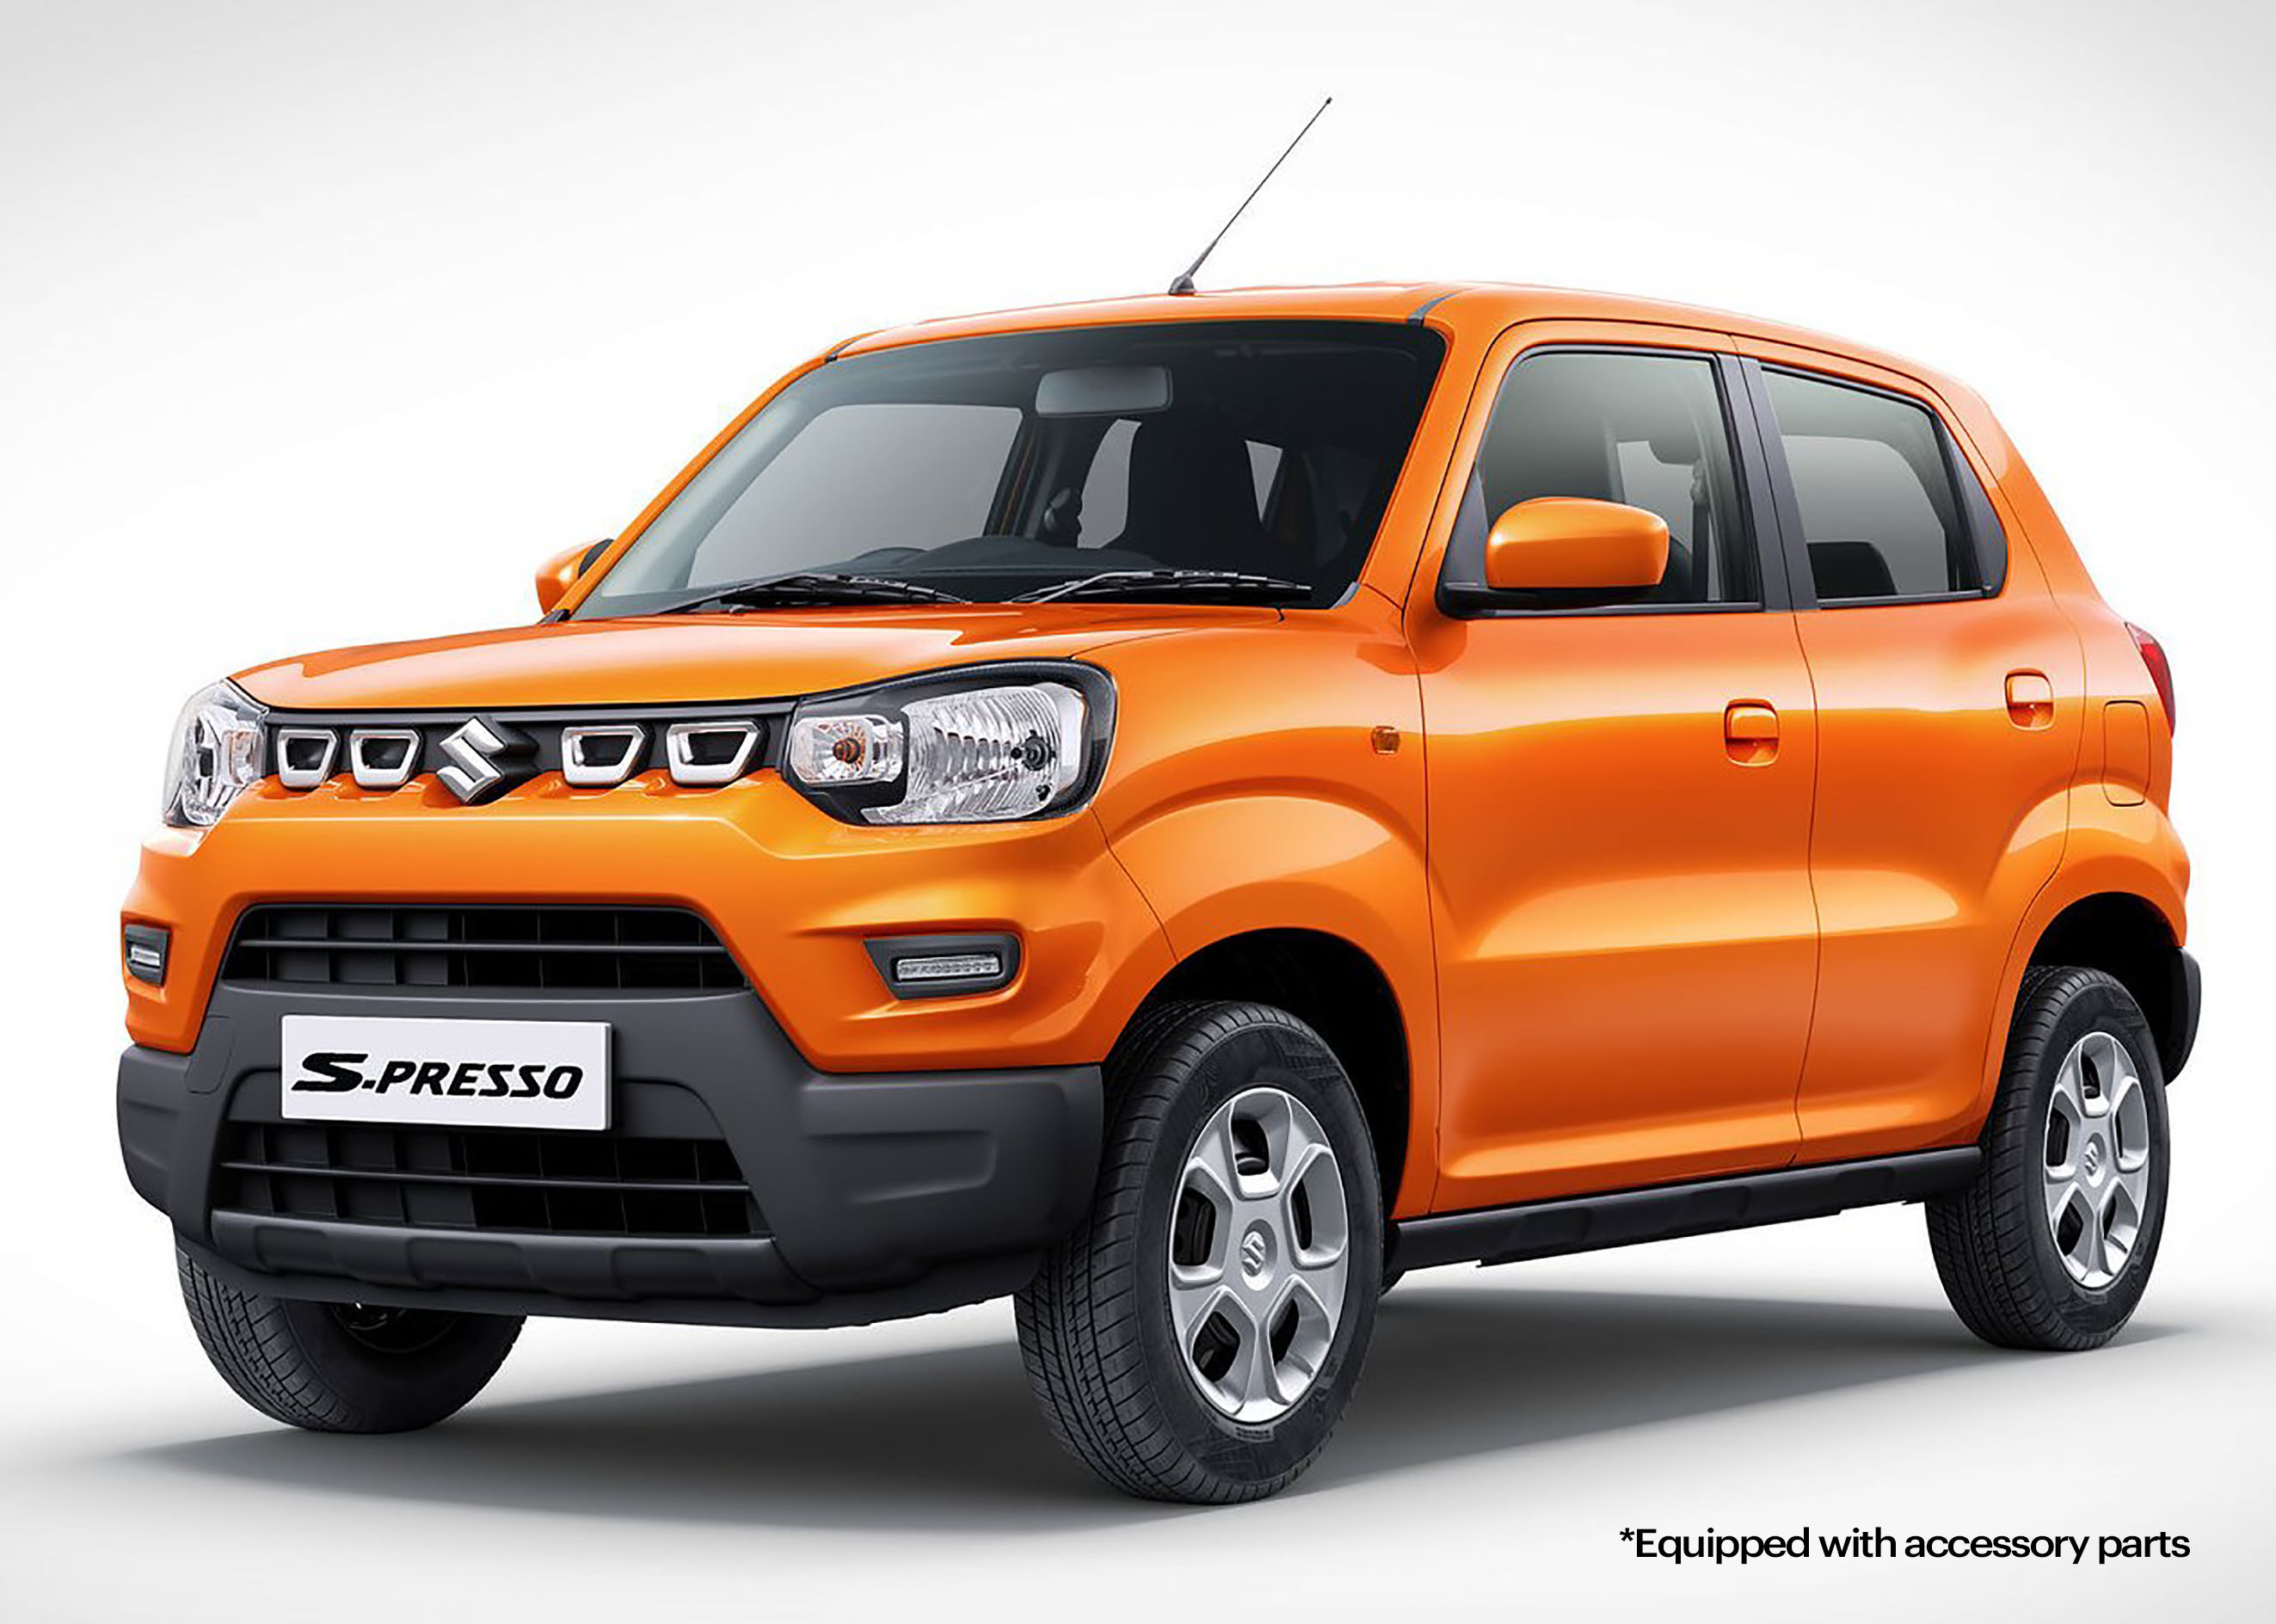 Maruti Suzuki S-PRESSO debuts as one of India’s top 10 bestselling cars